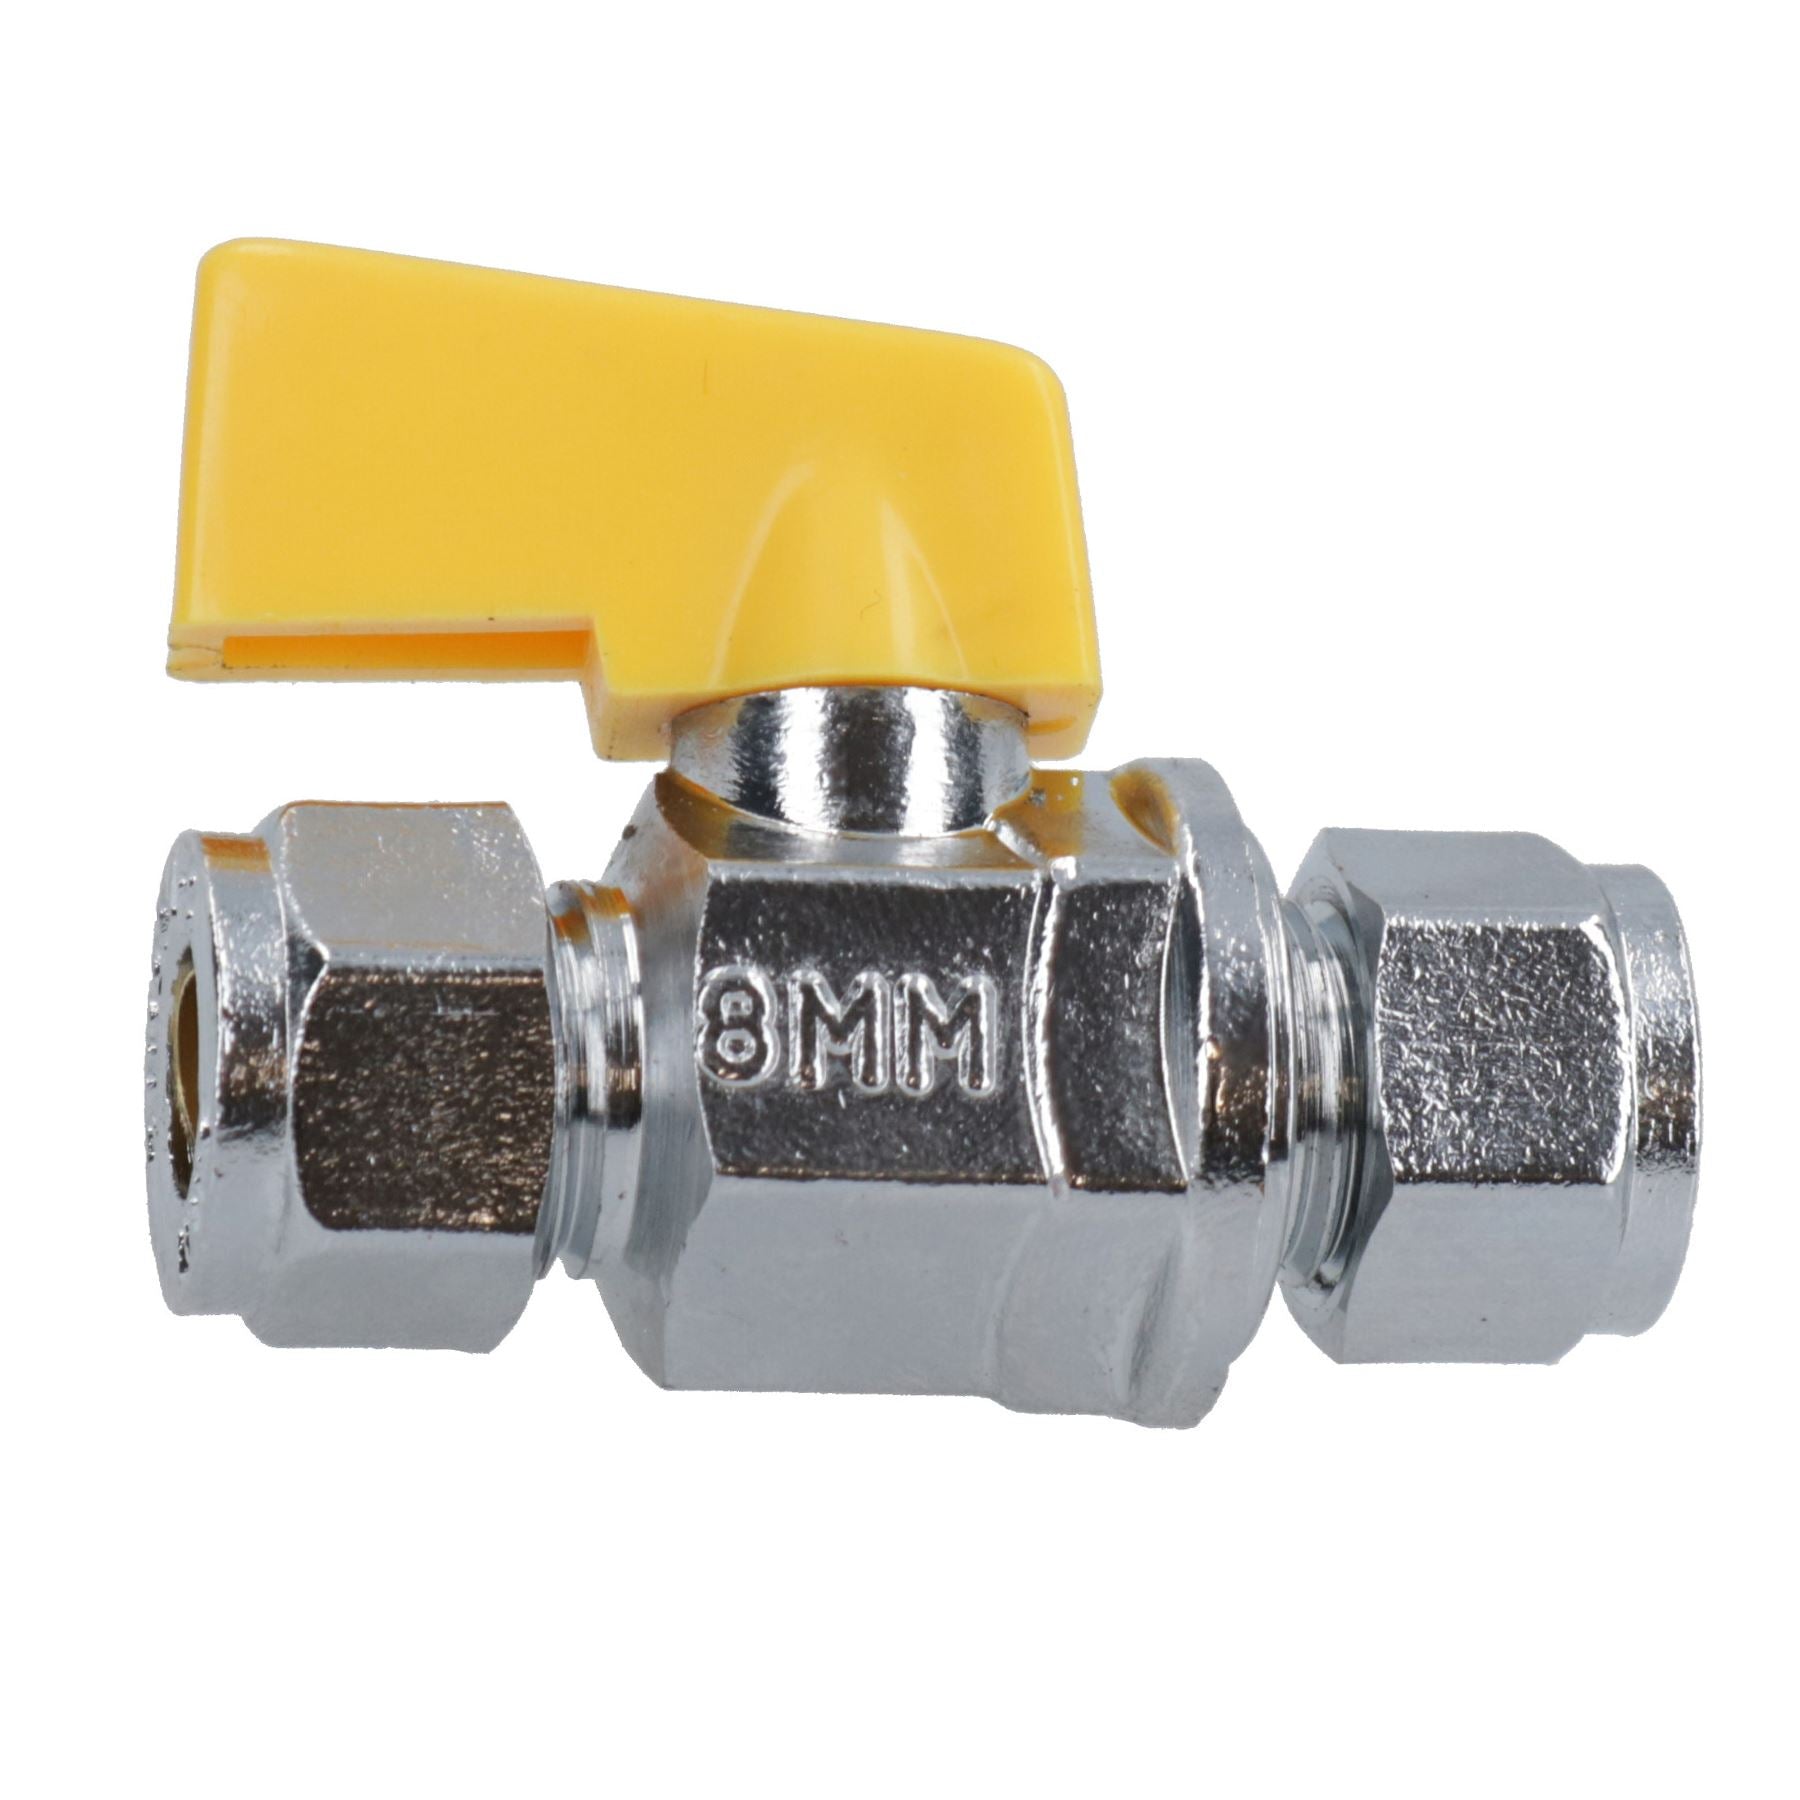 Straight Mini Ball Valve for Water Gas LPG Flow Regulator Compression 8mm Pipe